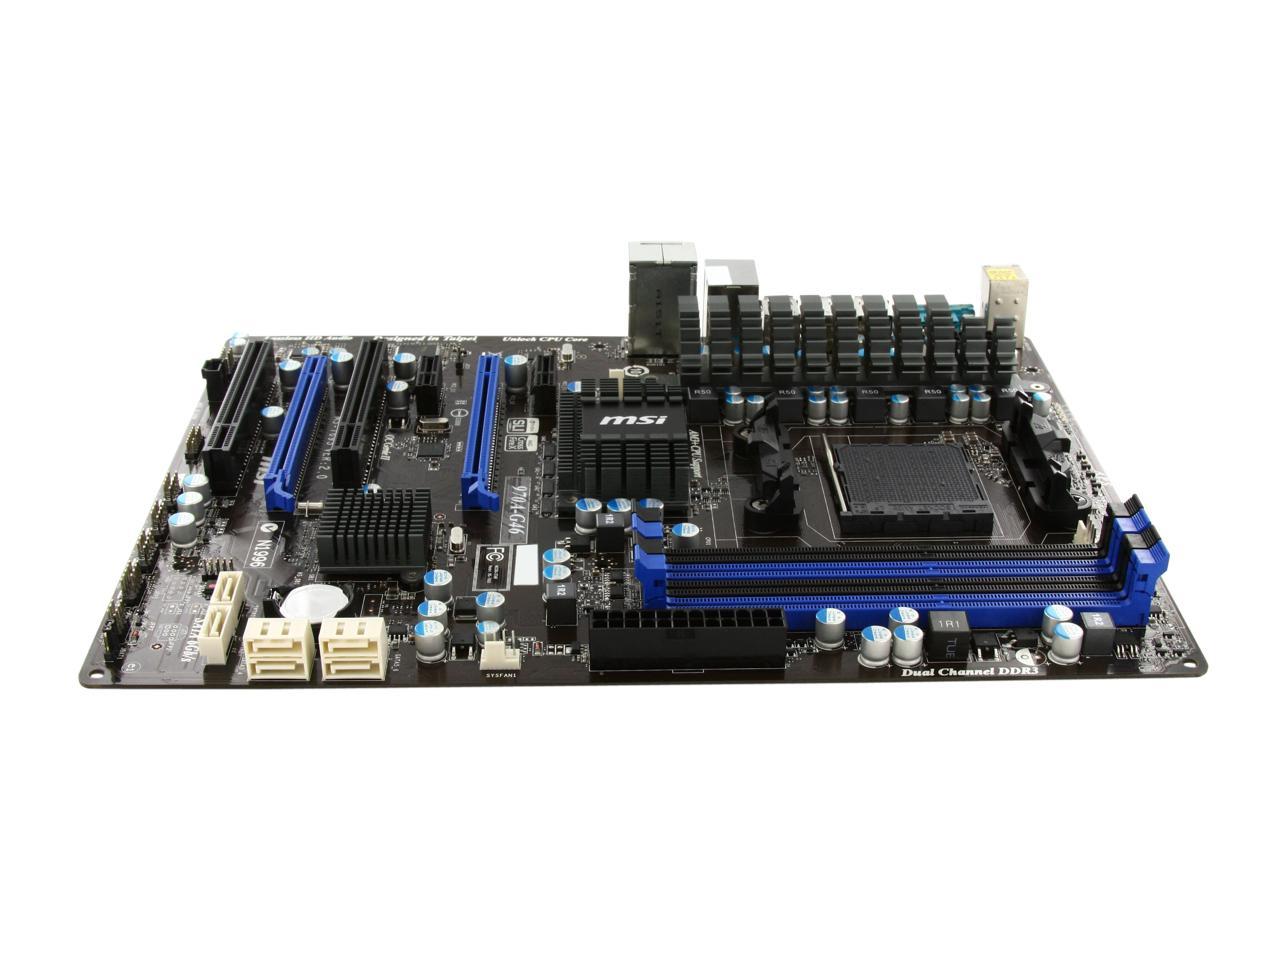 Used - Very Good: MSI 970A-G46 AM3+/AM3 ATX AMD Motherboard with UEFI